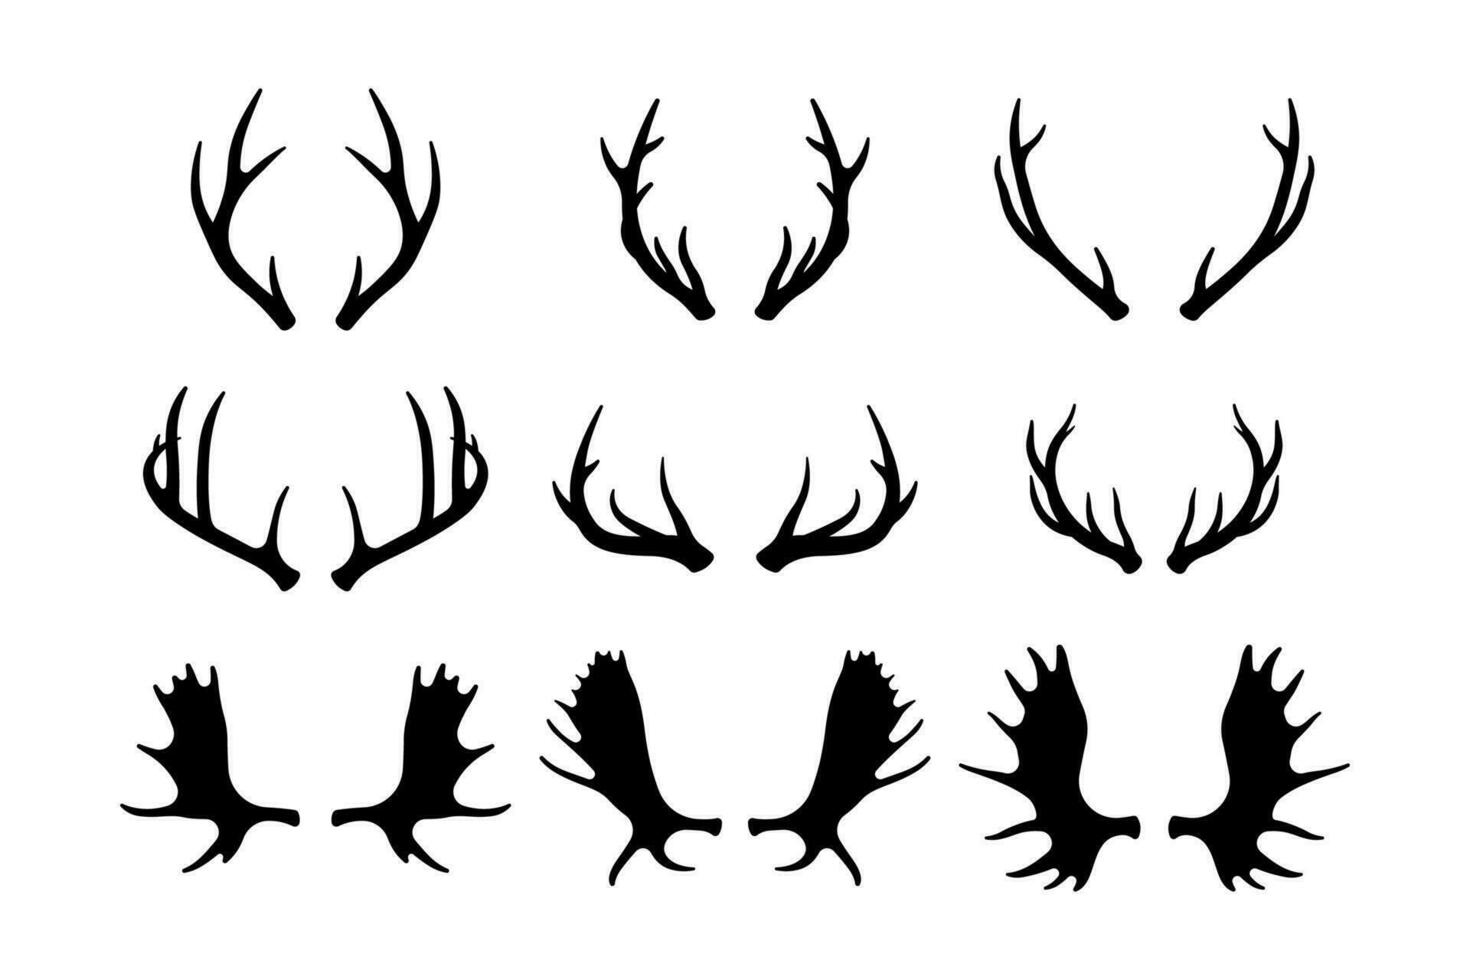 Antlers silhouette vector isolated on white background.